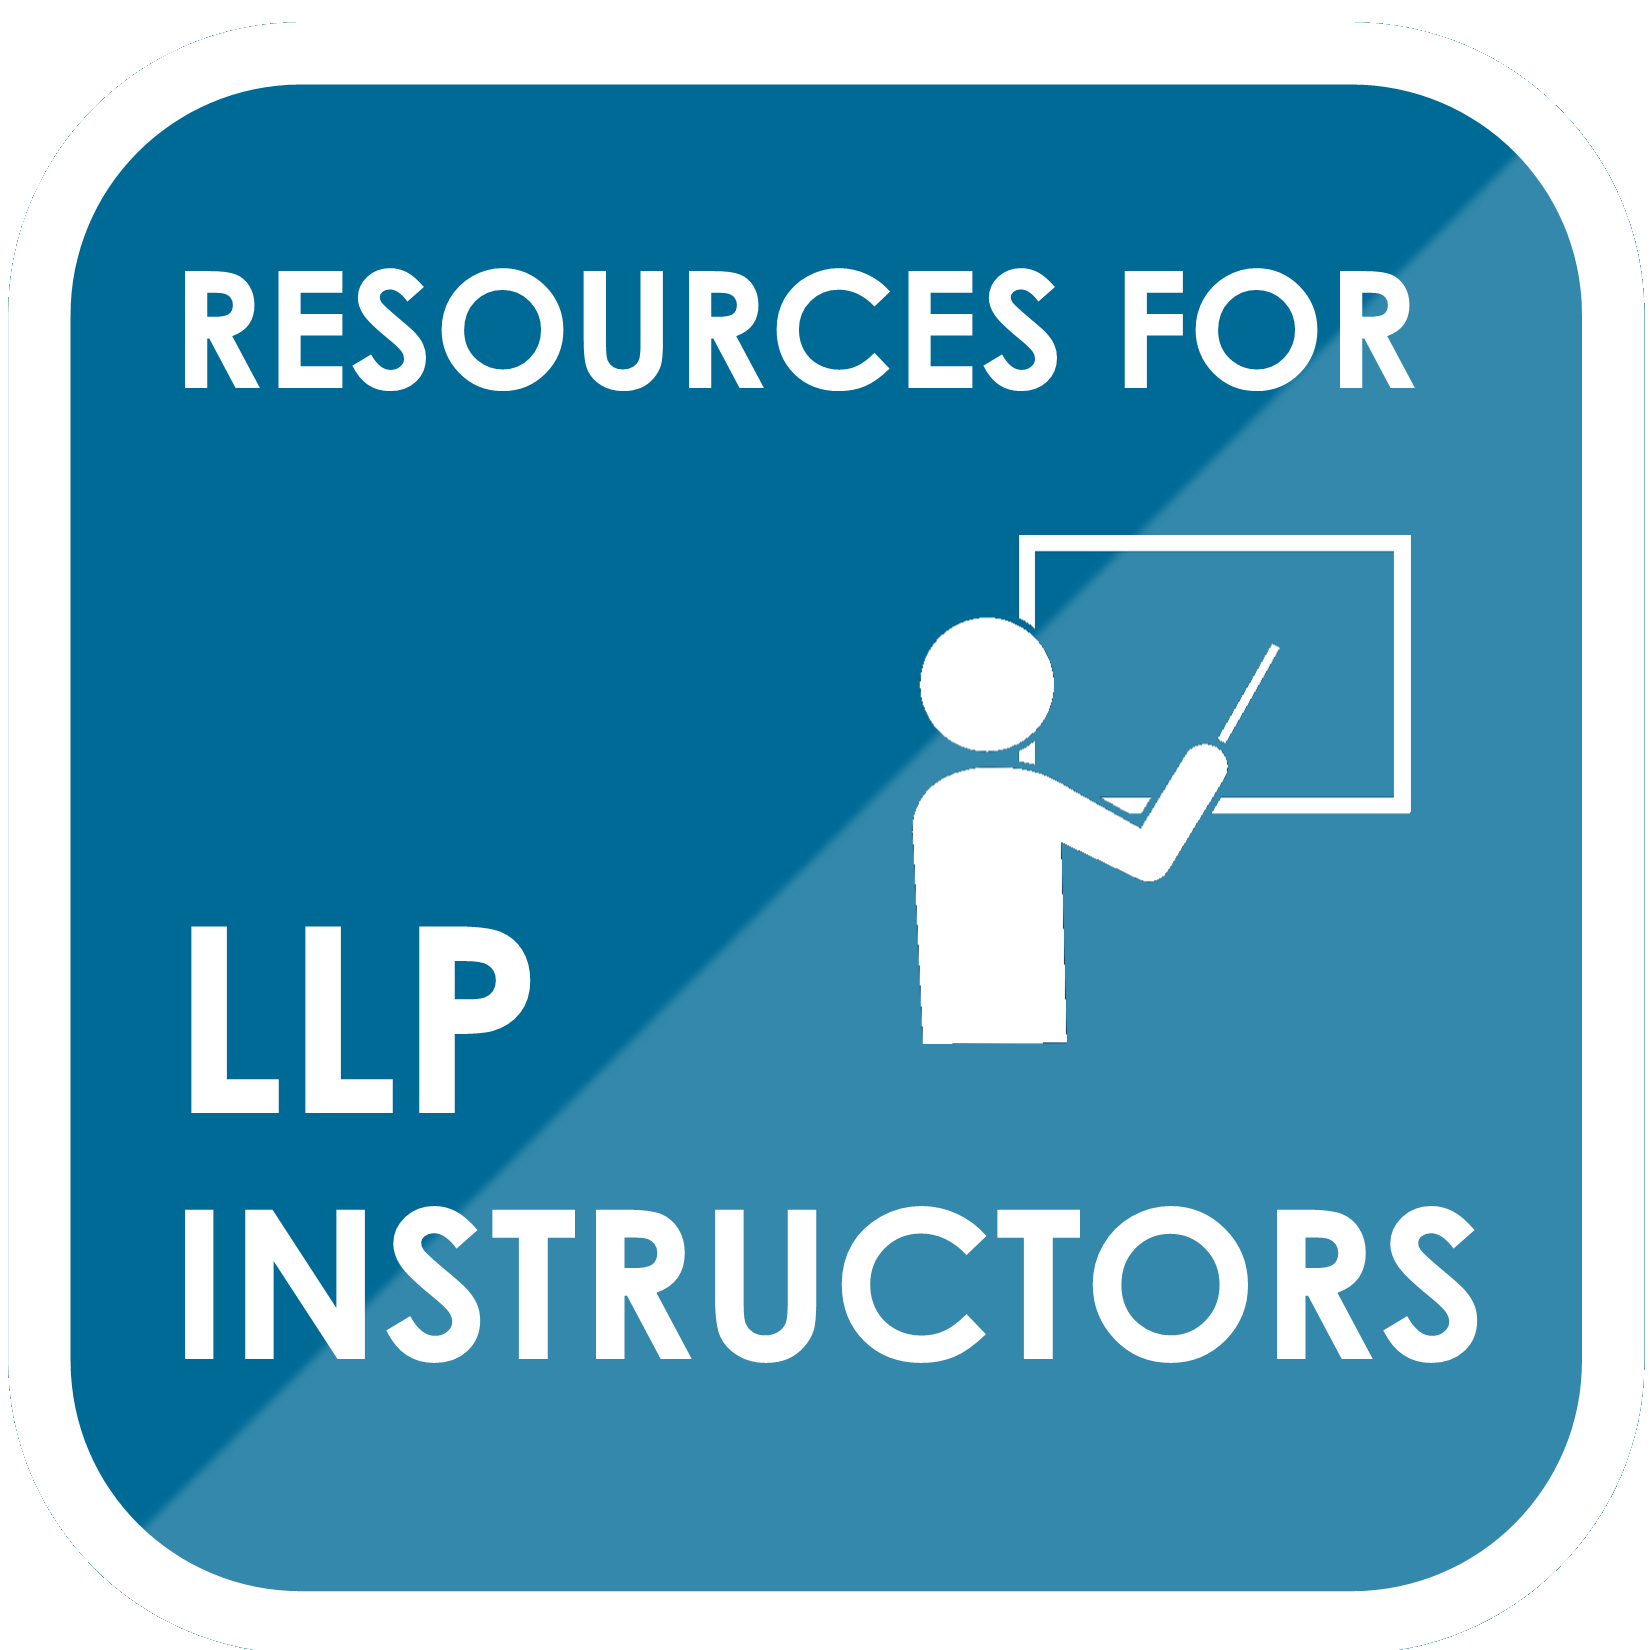 Resources for LLP Instructors